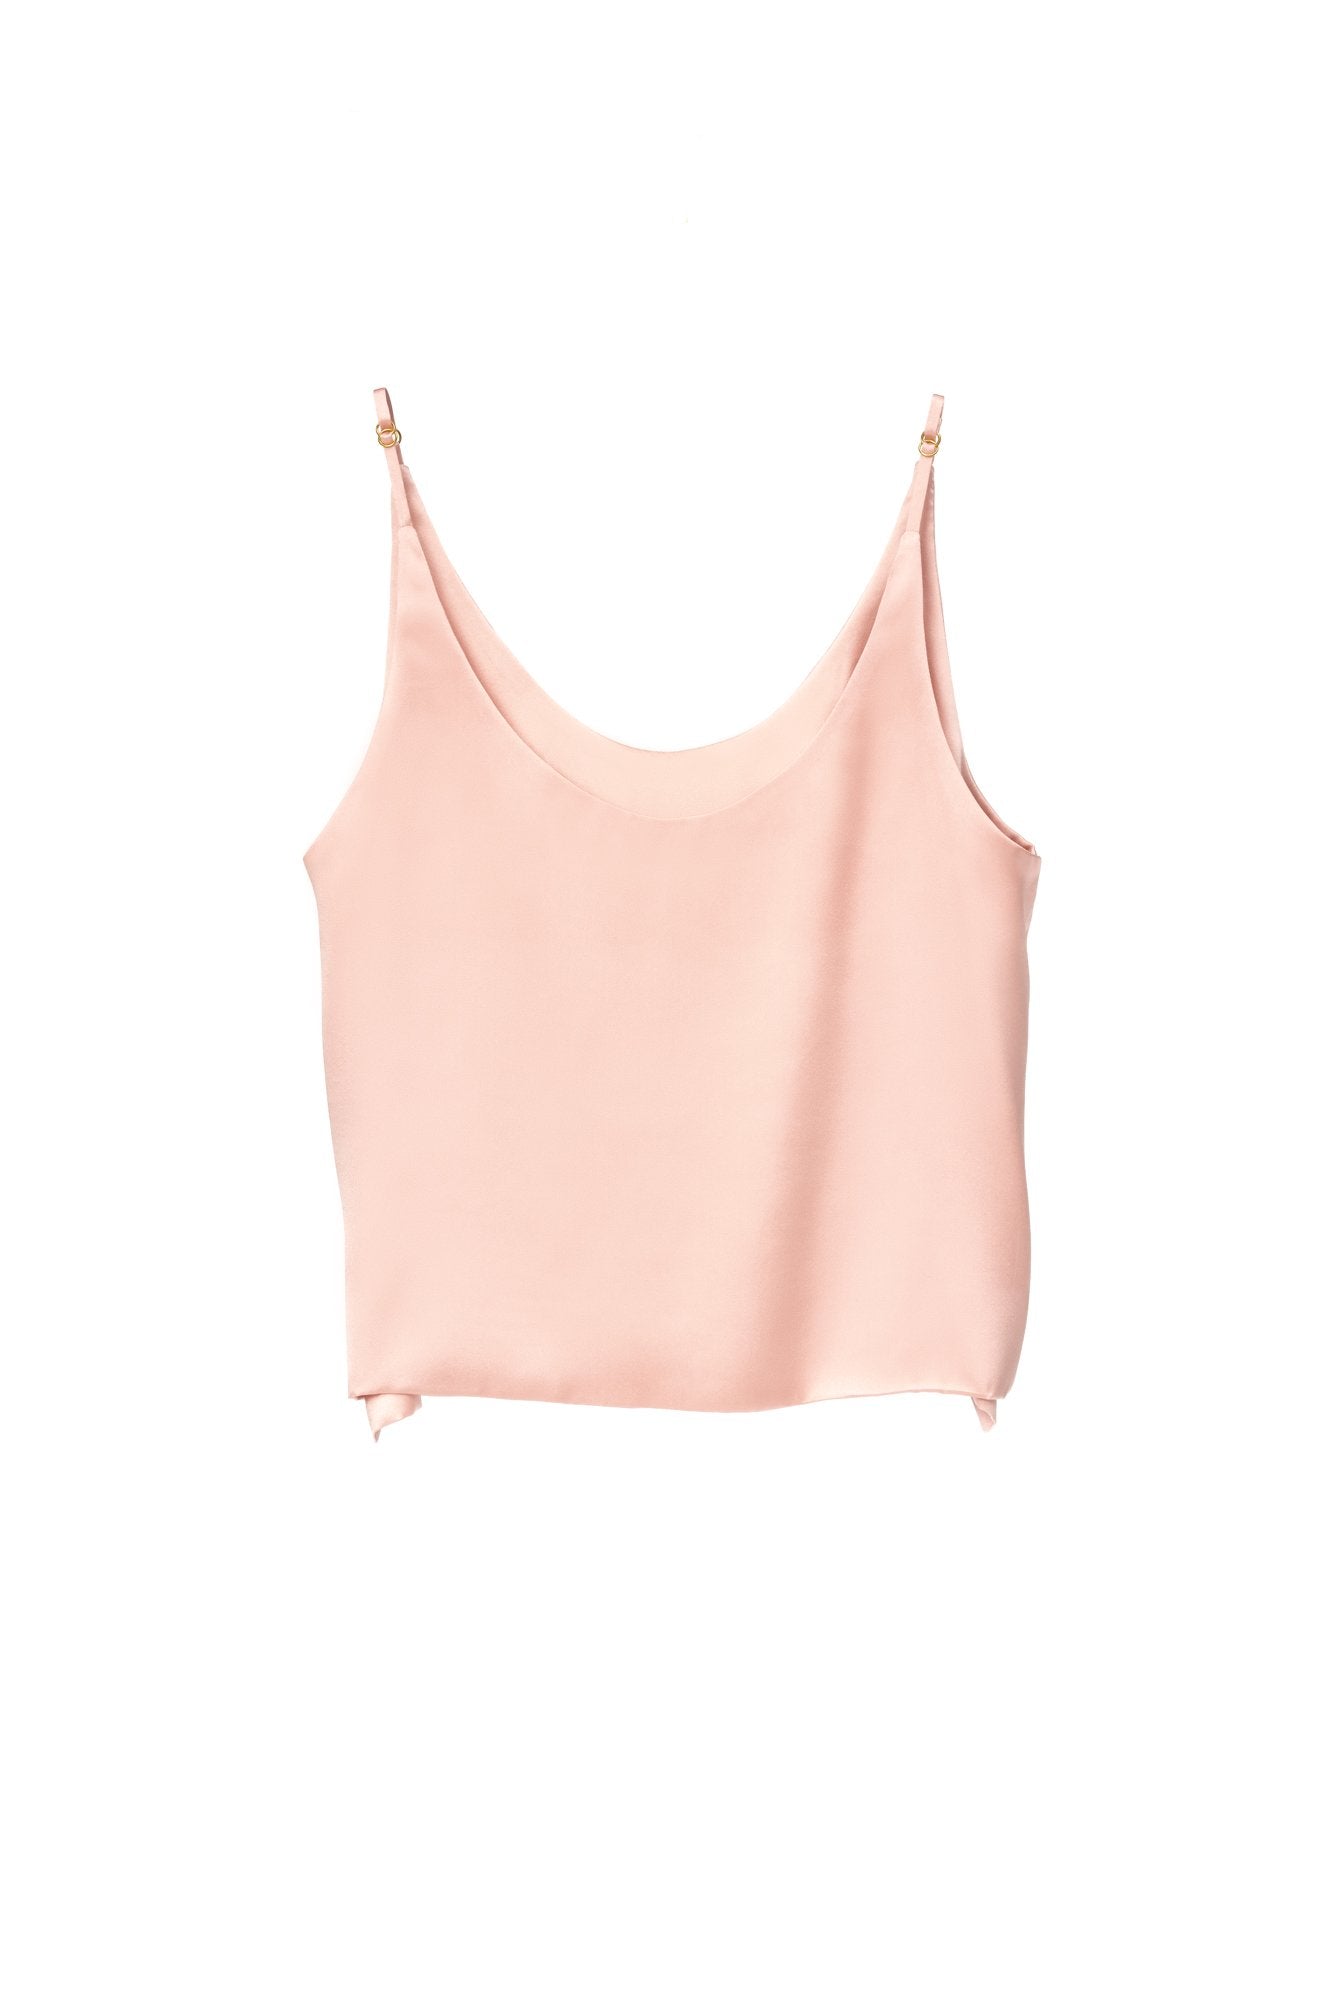 Silk Camisole in Shell Pink  - NEW Prolonged Edition - silk&jam